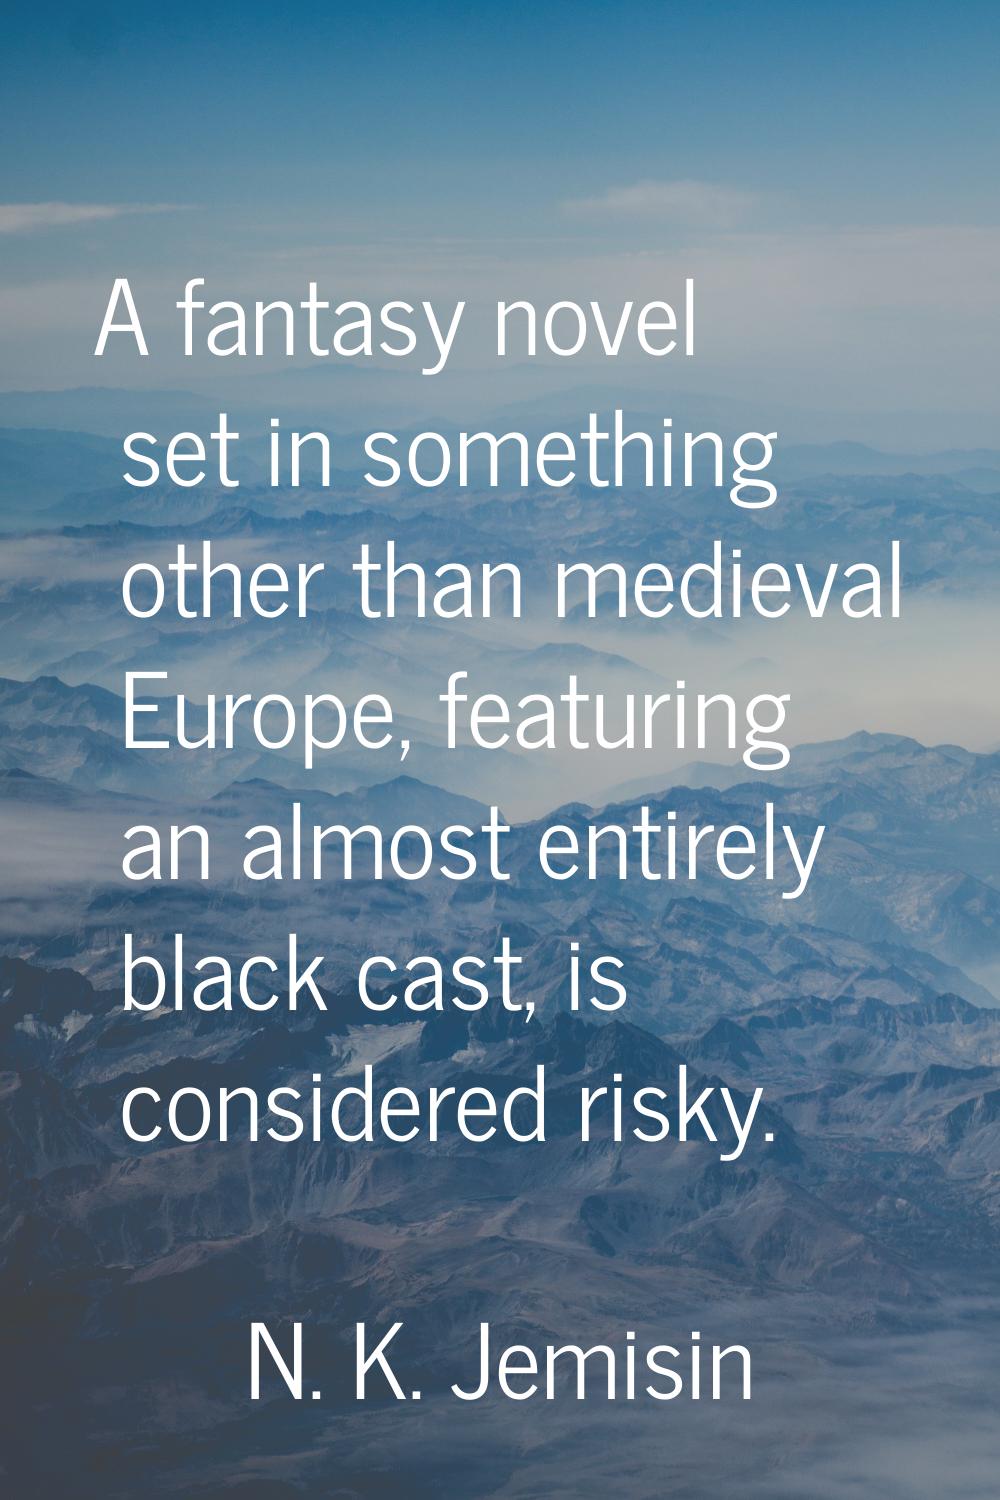 A fantasy novel set in something other than medieval Europe, featuring an almost entirely black cas